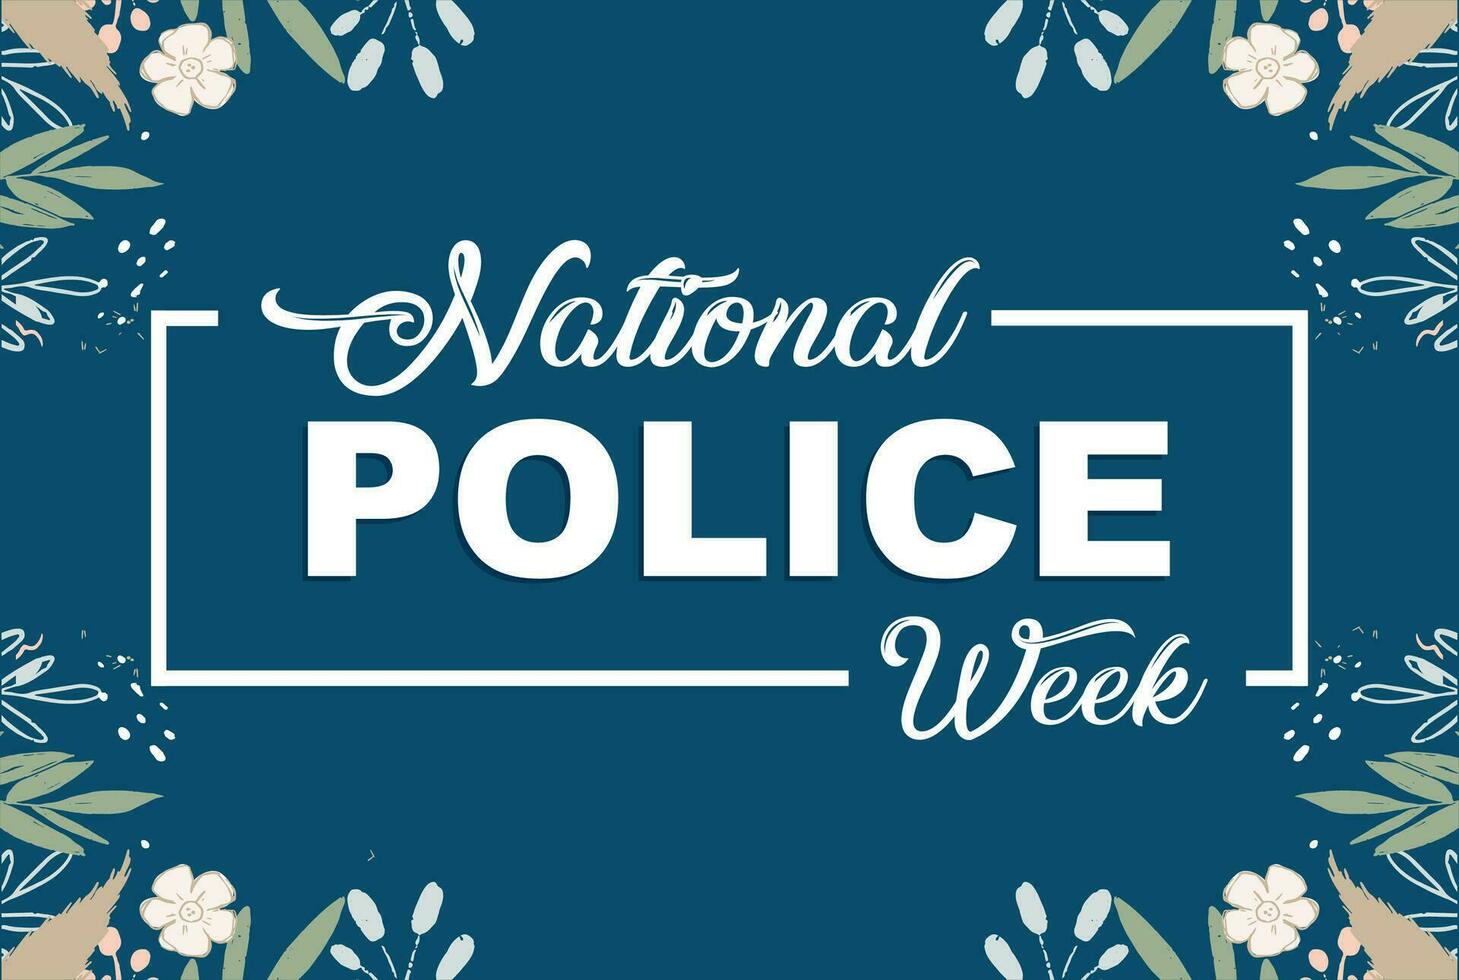 National Police Week holiday concept vector